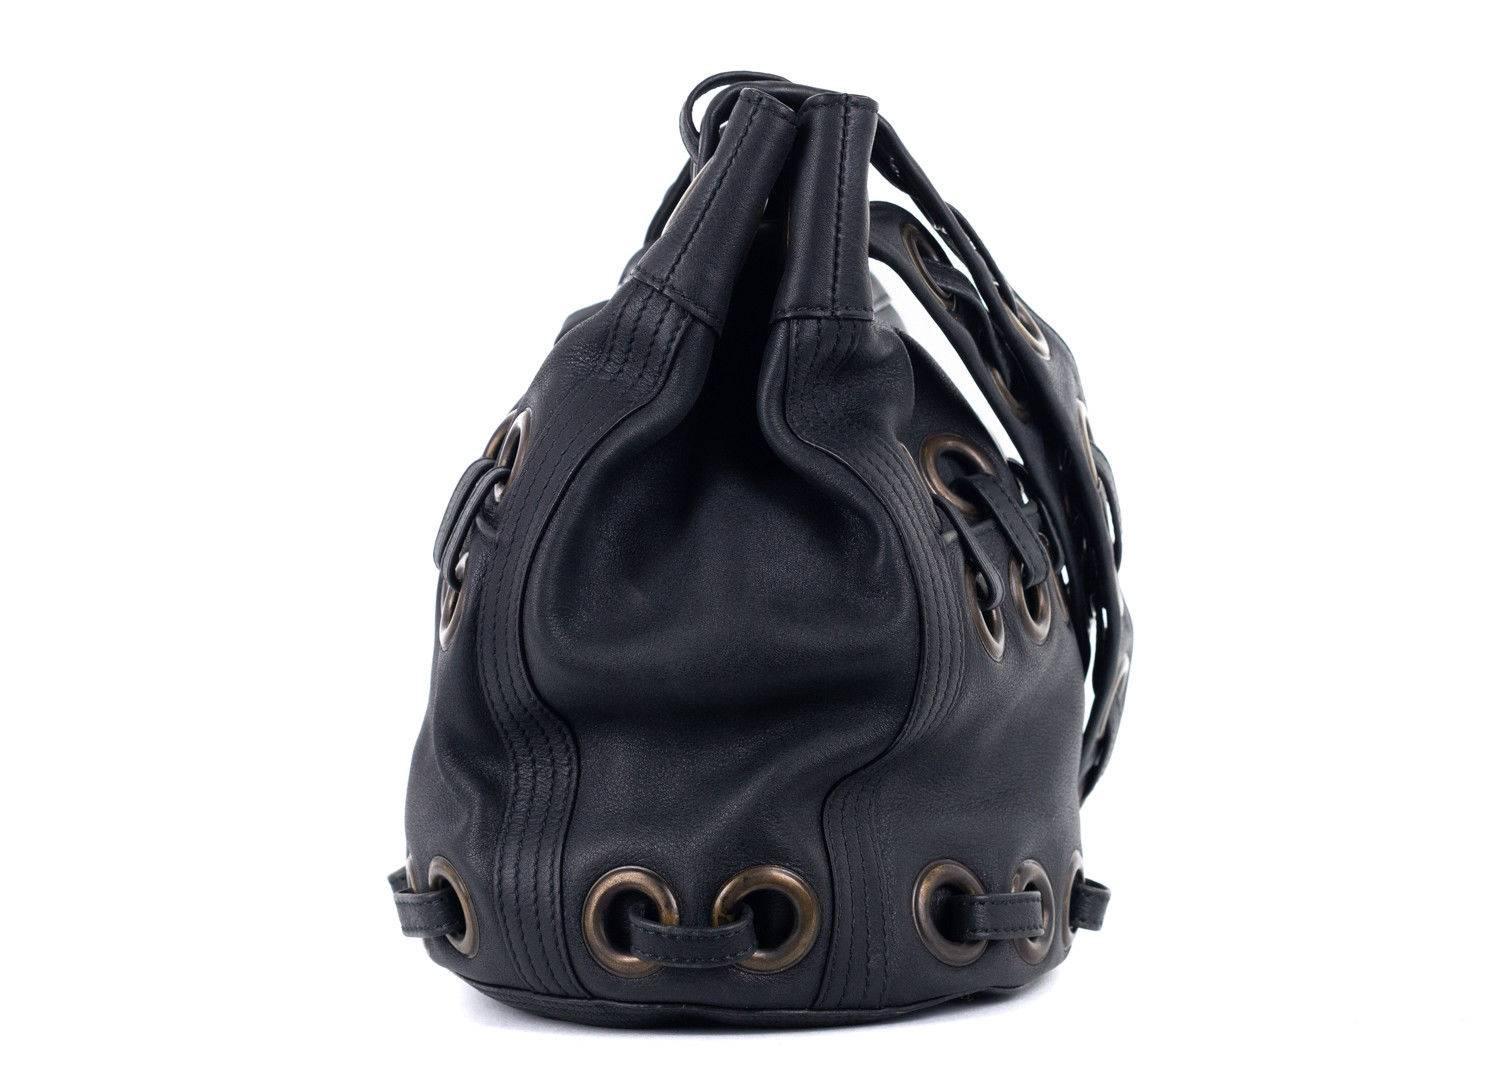 oberto Cavalli solid dark greay leather bucket tote bag. This bag features large eyelet detailing with dark toned hardware. Spice up your everday style with this edge tote bucket bag by wearing simple denim and chic blouse.

 

Leather
Large Eyetlet